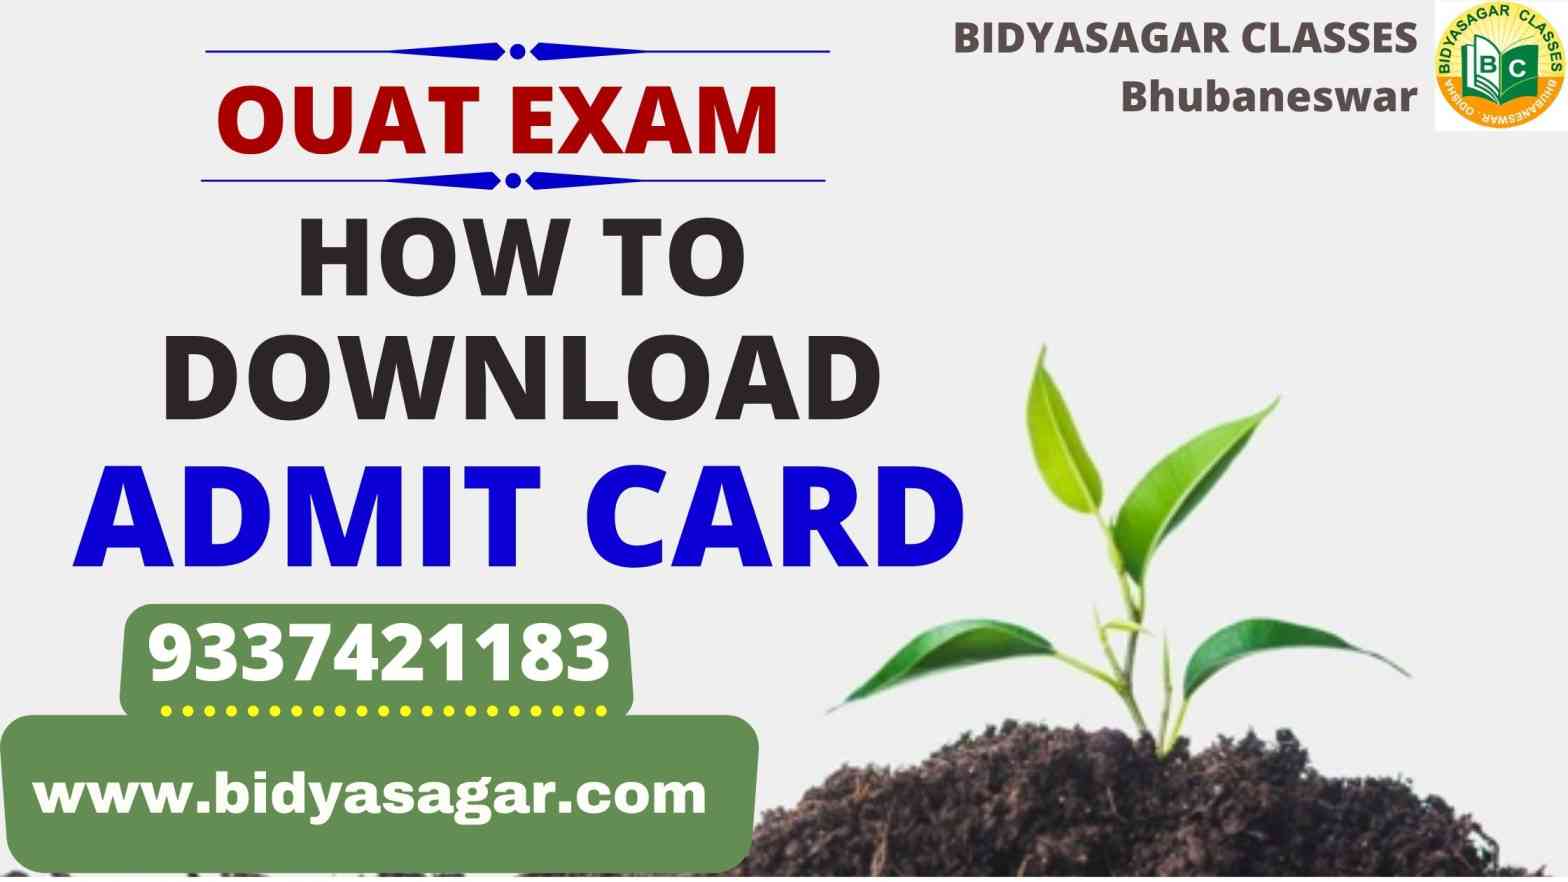 How to Download OUAT 2021 Admit Card